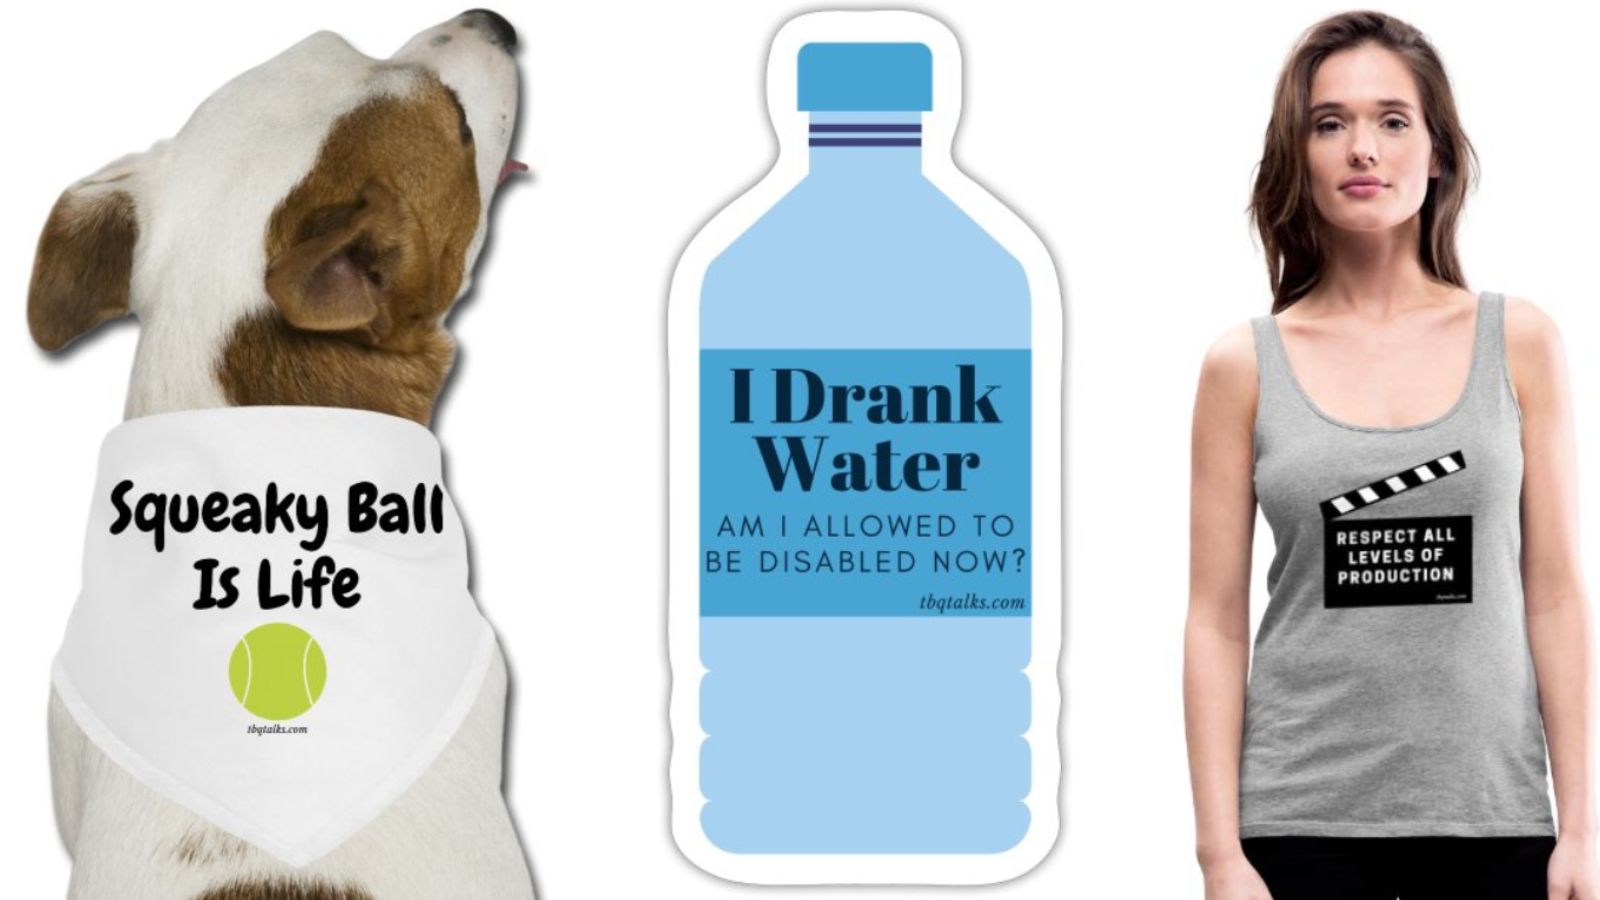 A dog bandana that says "Squeaky Ball is Life," a sticker that says "I drank water, am I allowed to be disabled now?" and a tank top that says "Respect all levels of production."